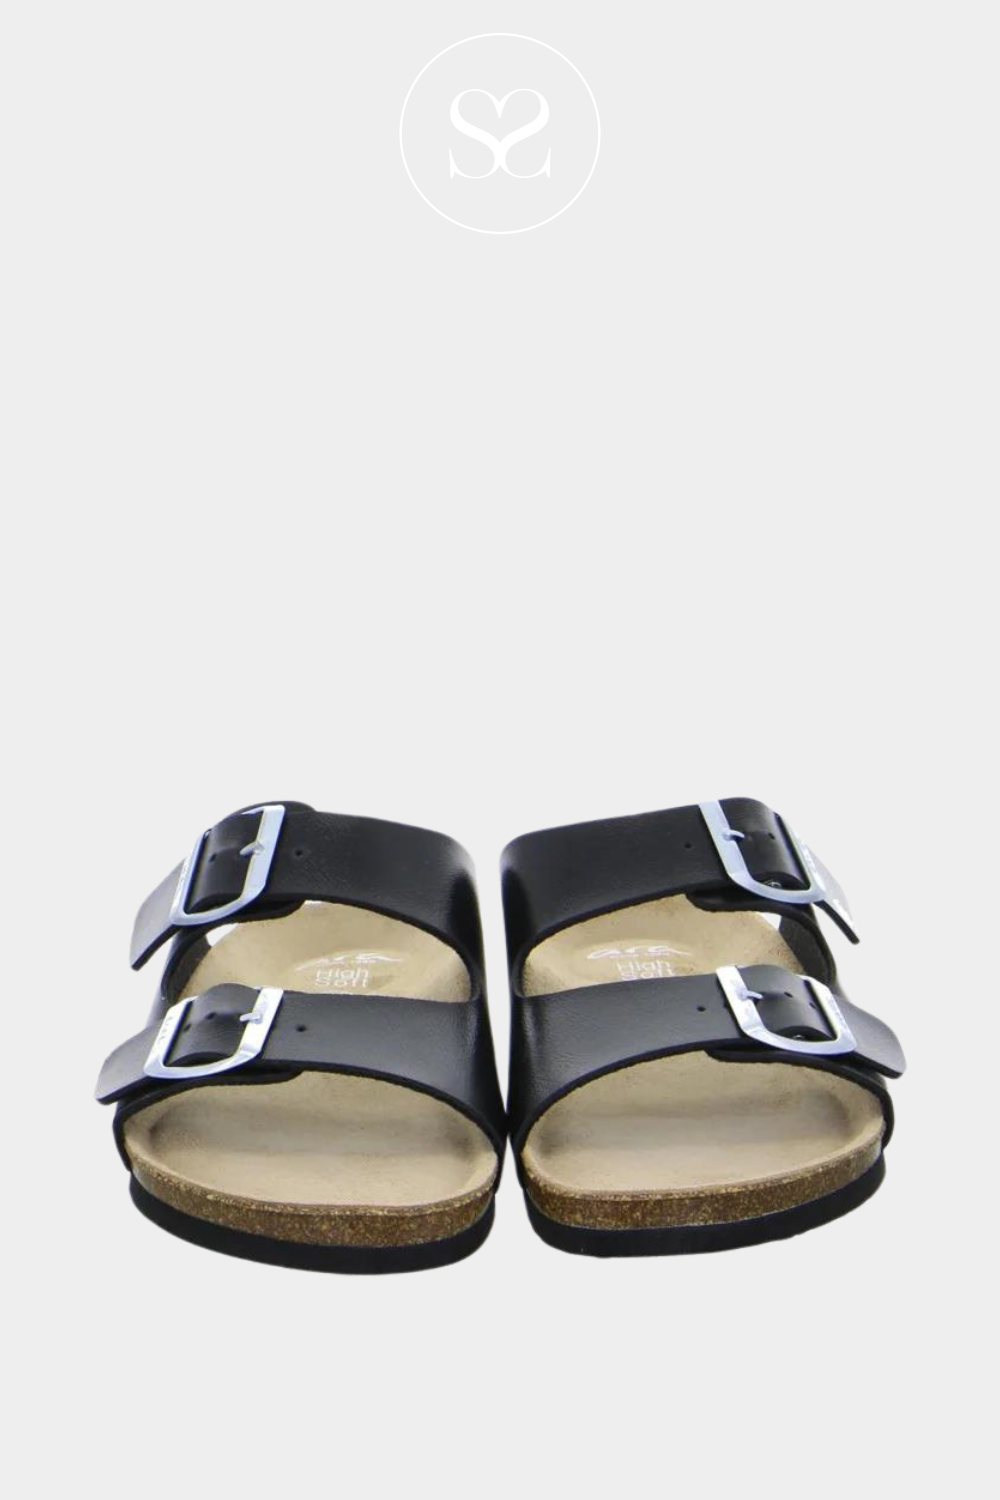 ARA 15-17018 BLACK LEATHER SLIDER MULE STYLE SANDALS WITH DOUBLE STRAP AND SILVER BUCKLES